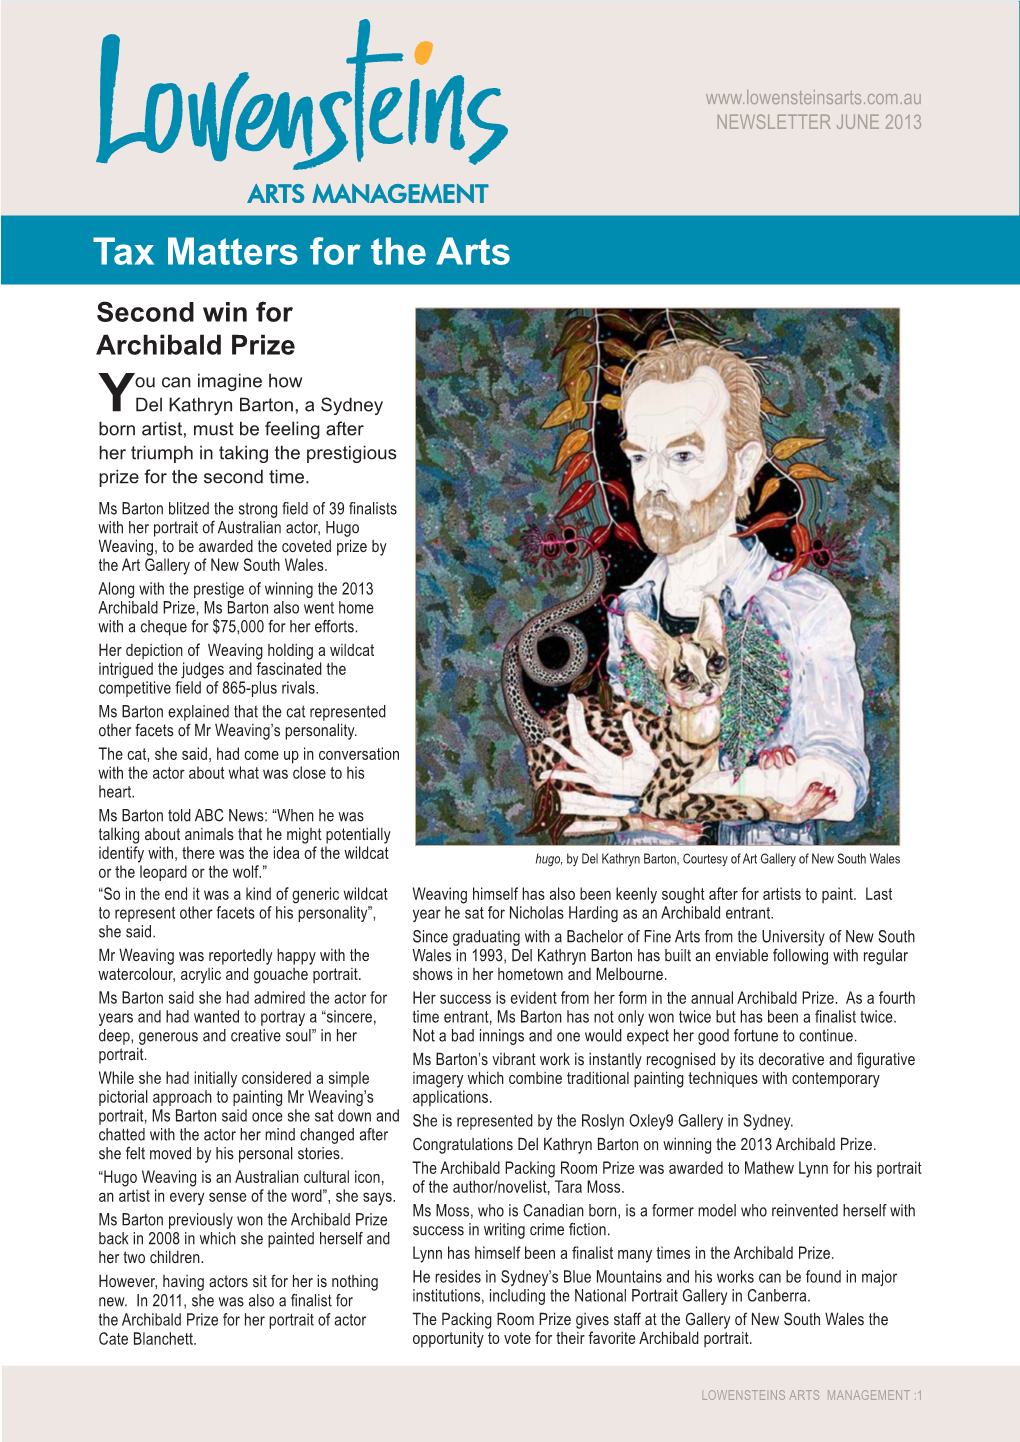 Tax Matters for the Arts